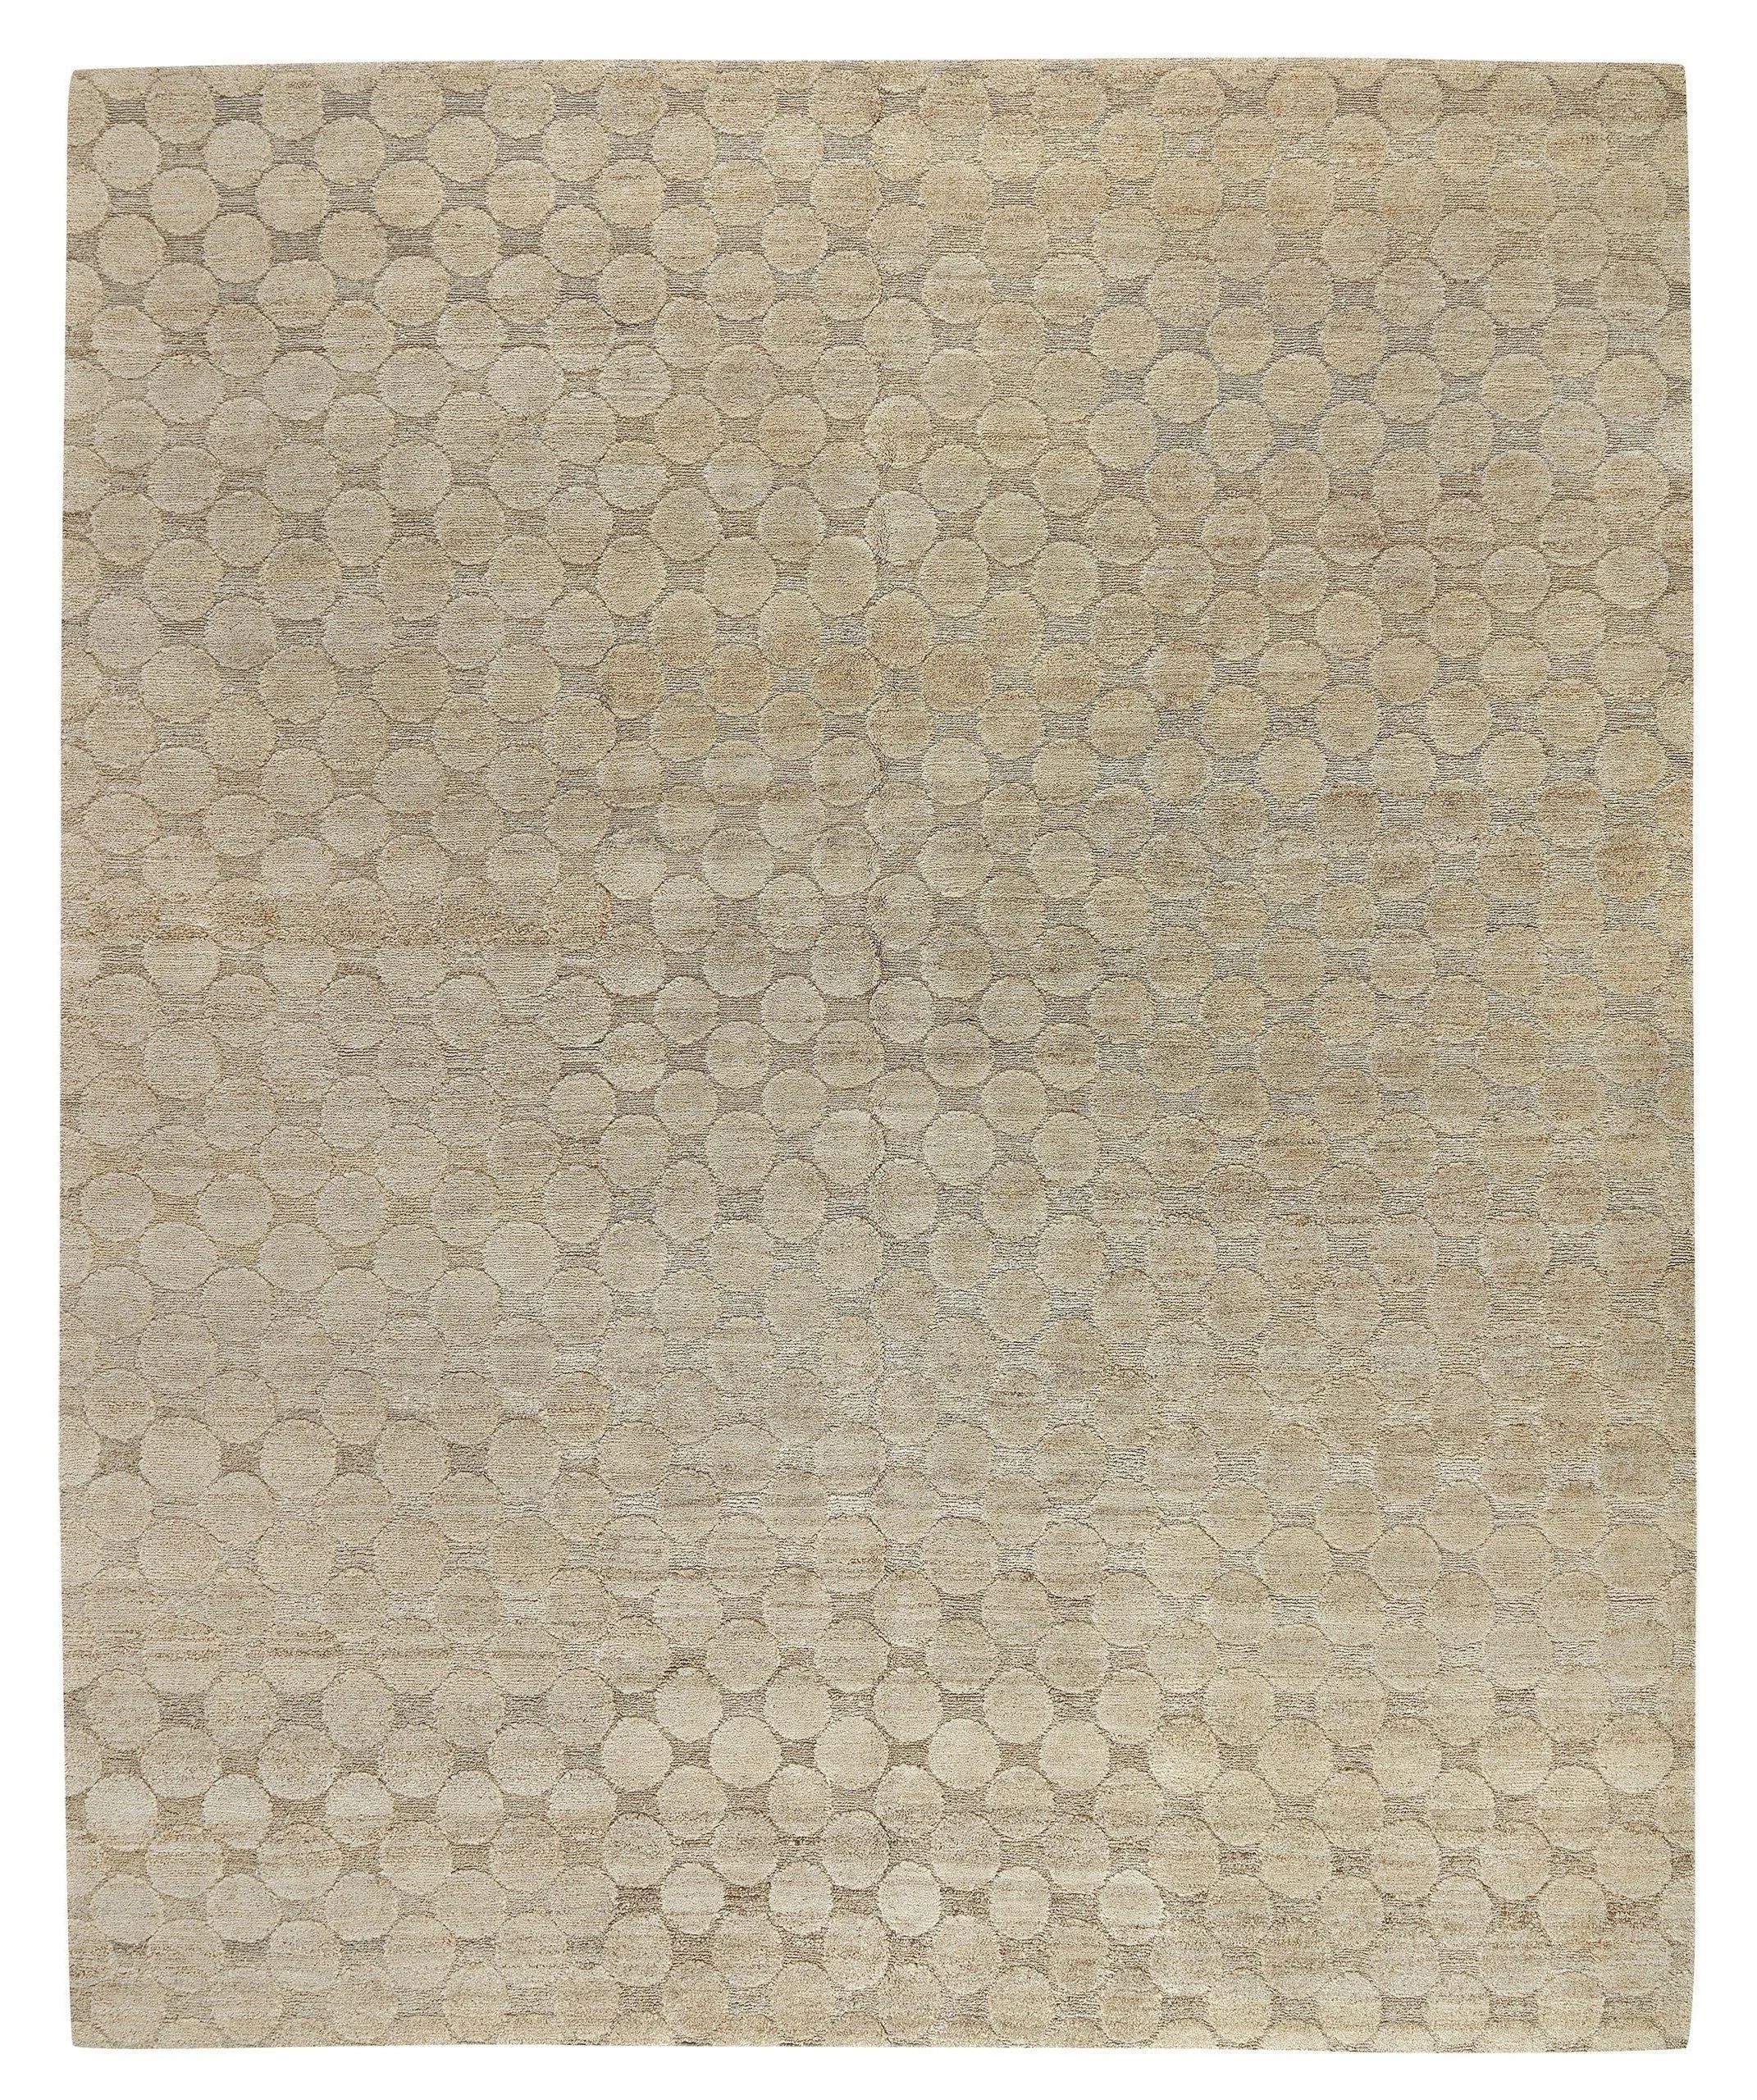 Pure Textures Handmade Hand-Knotted Beige/Gray/Neutral Rug | Wayfair North America